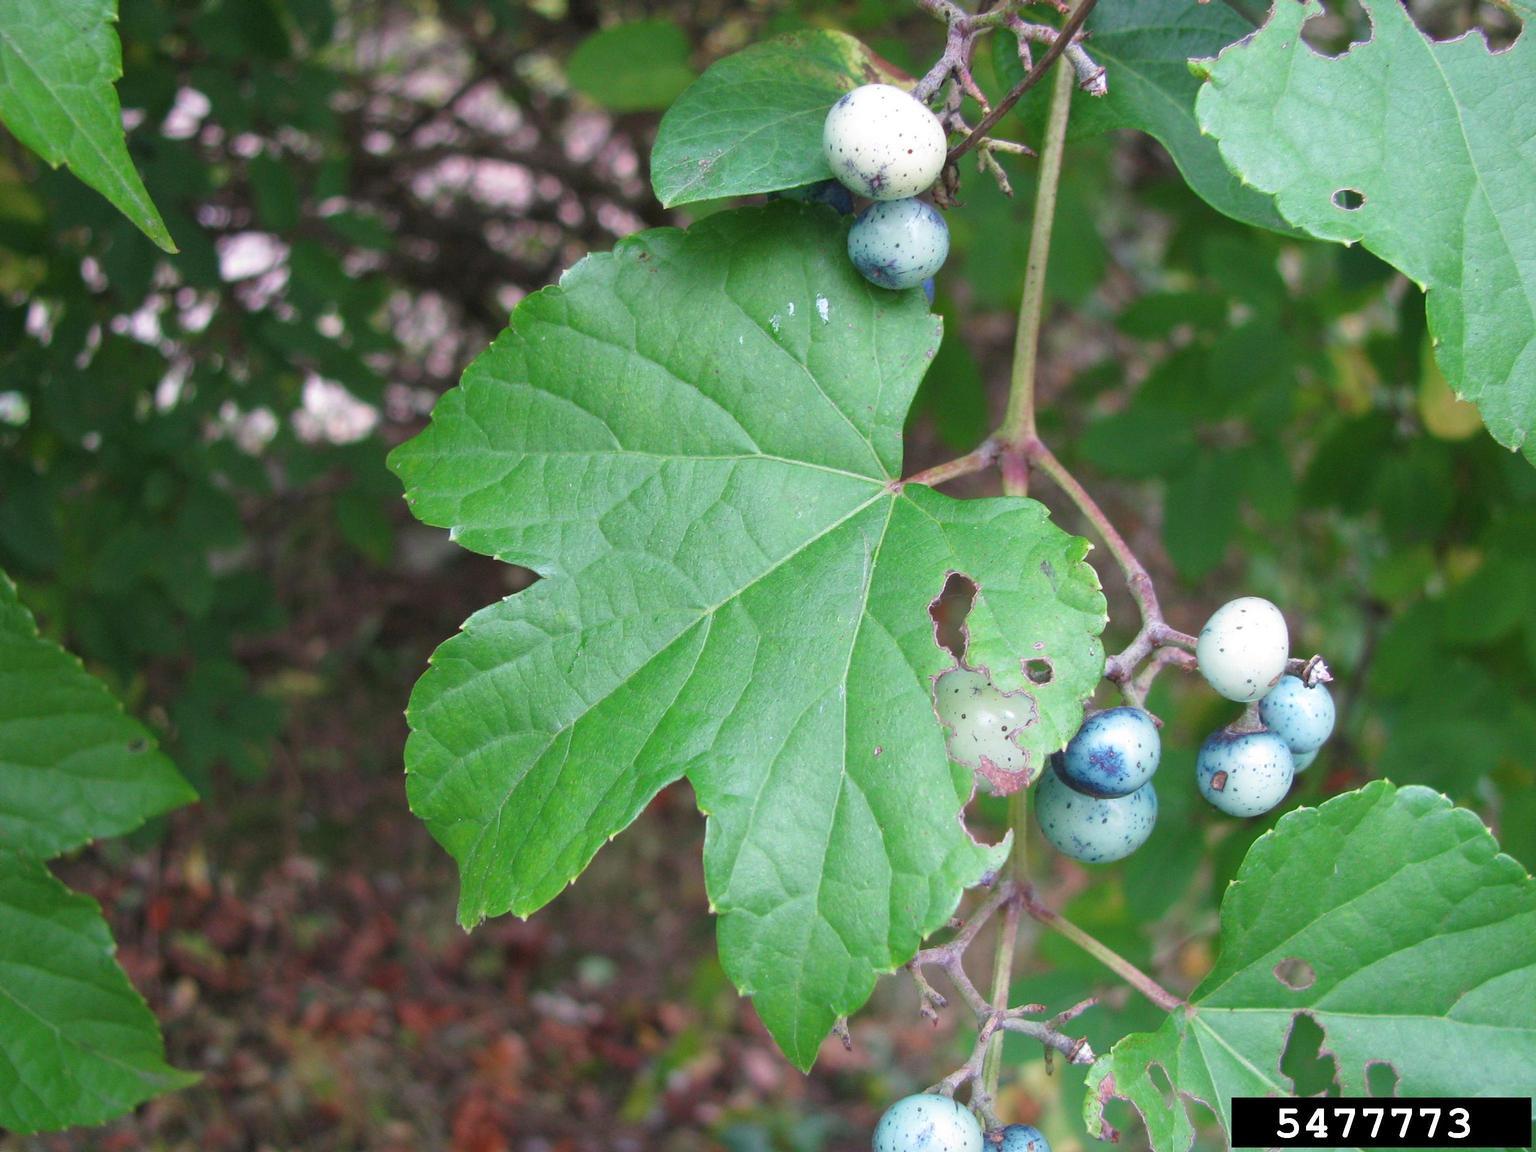 invasive porcelainberry vines and foliage with blue berries